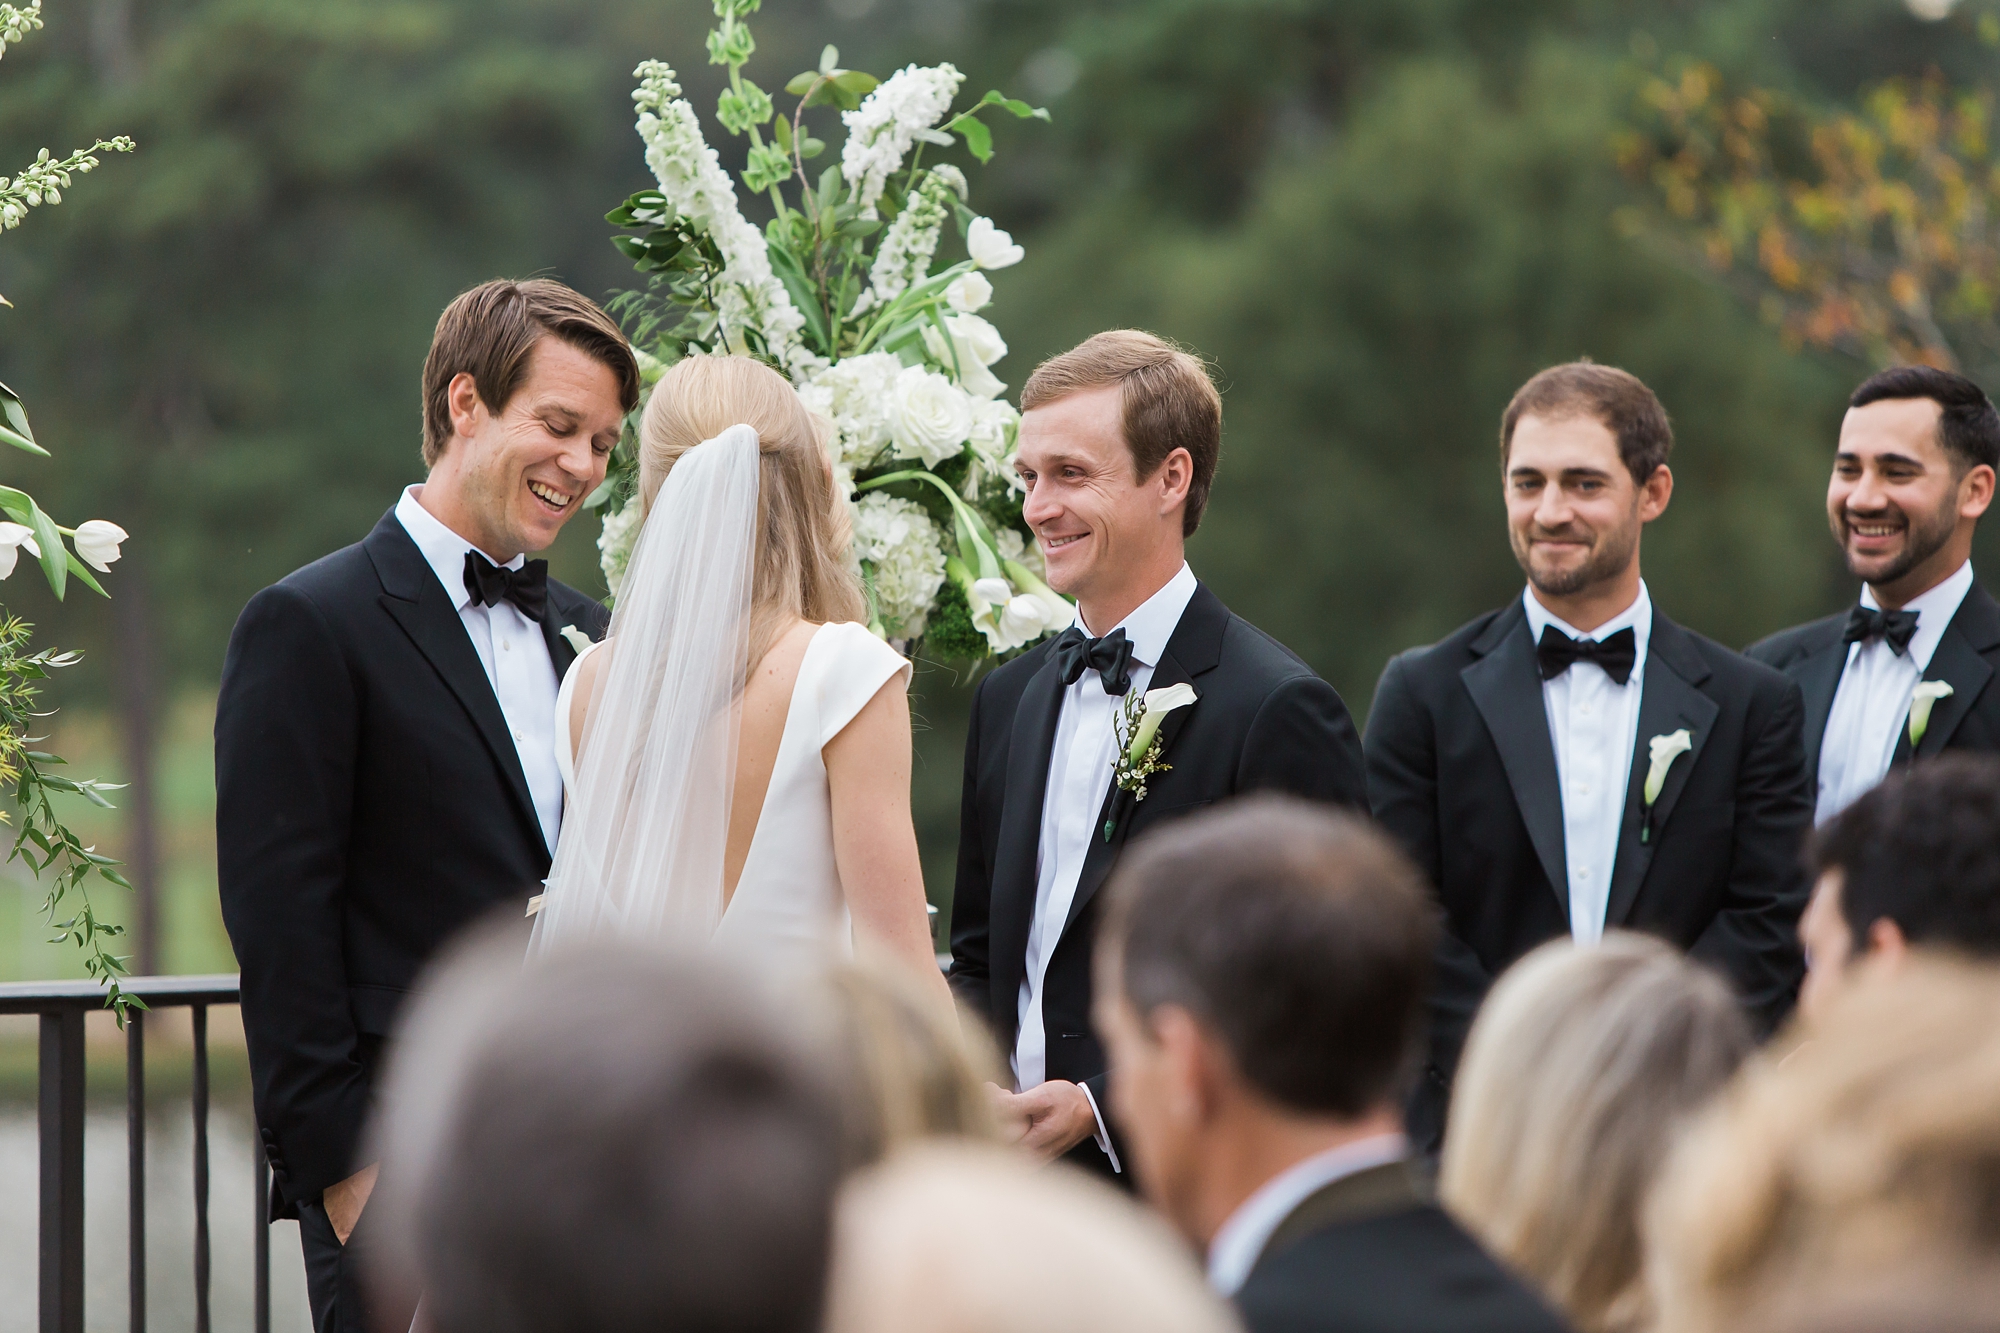 Black tie wedding ceremony at East Lake Golf Club by Atlanta's top wedding photographer Leigh Wolfe Photography